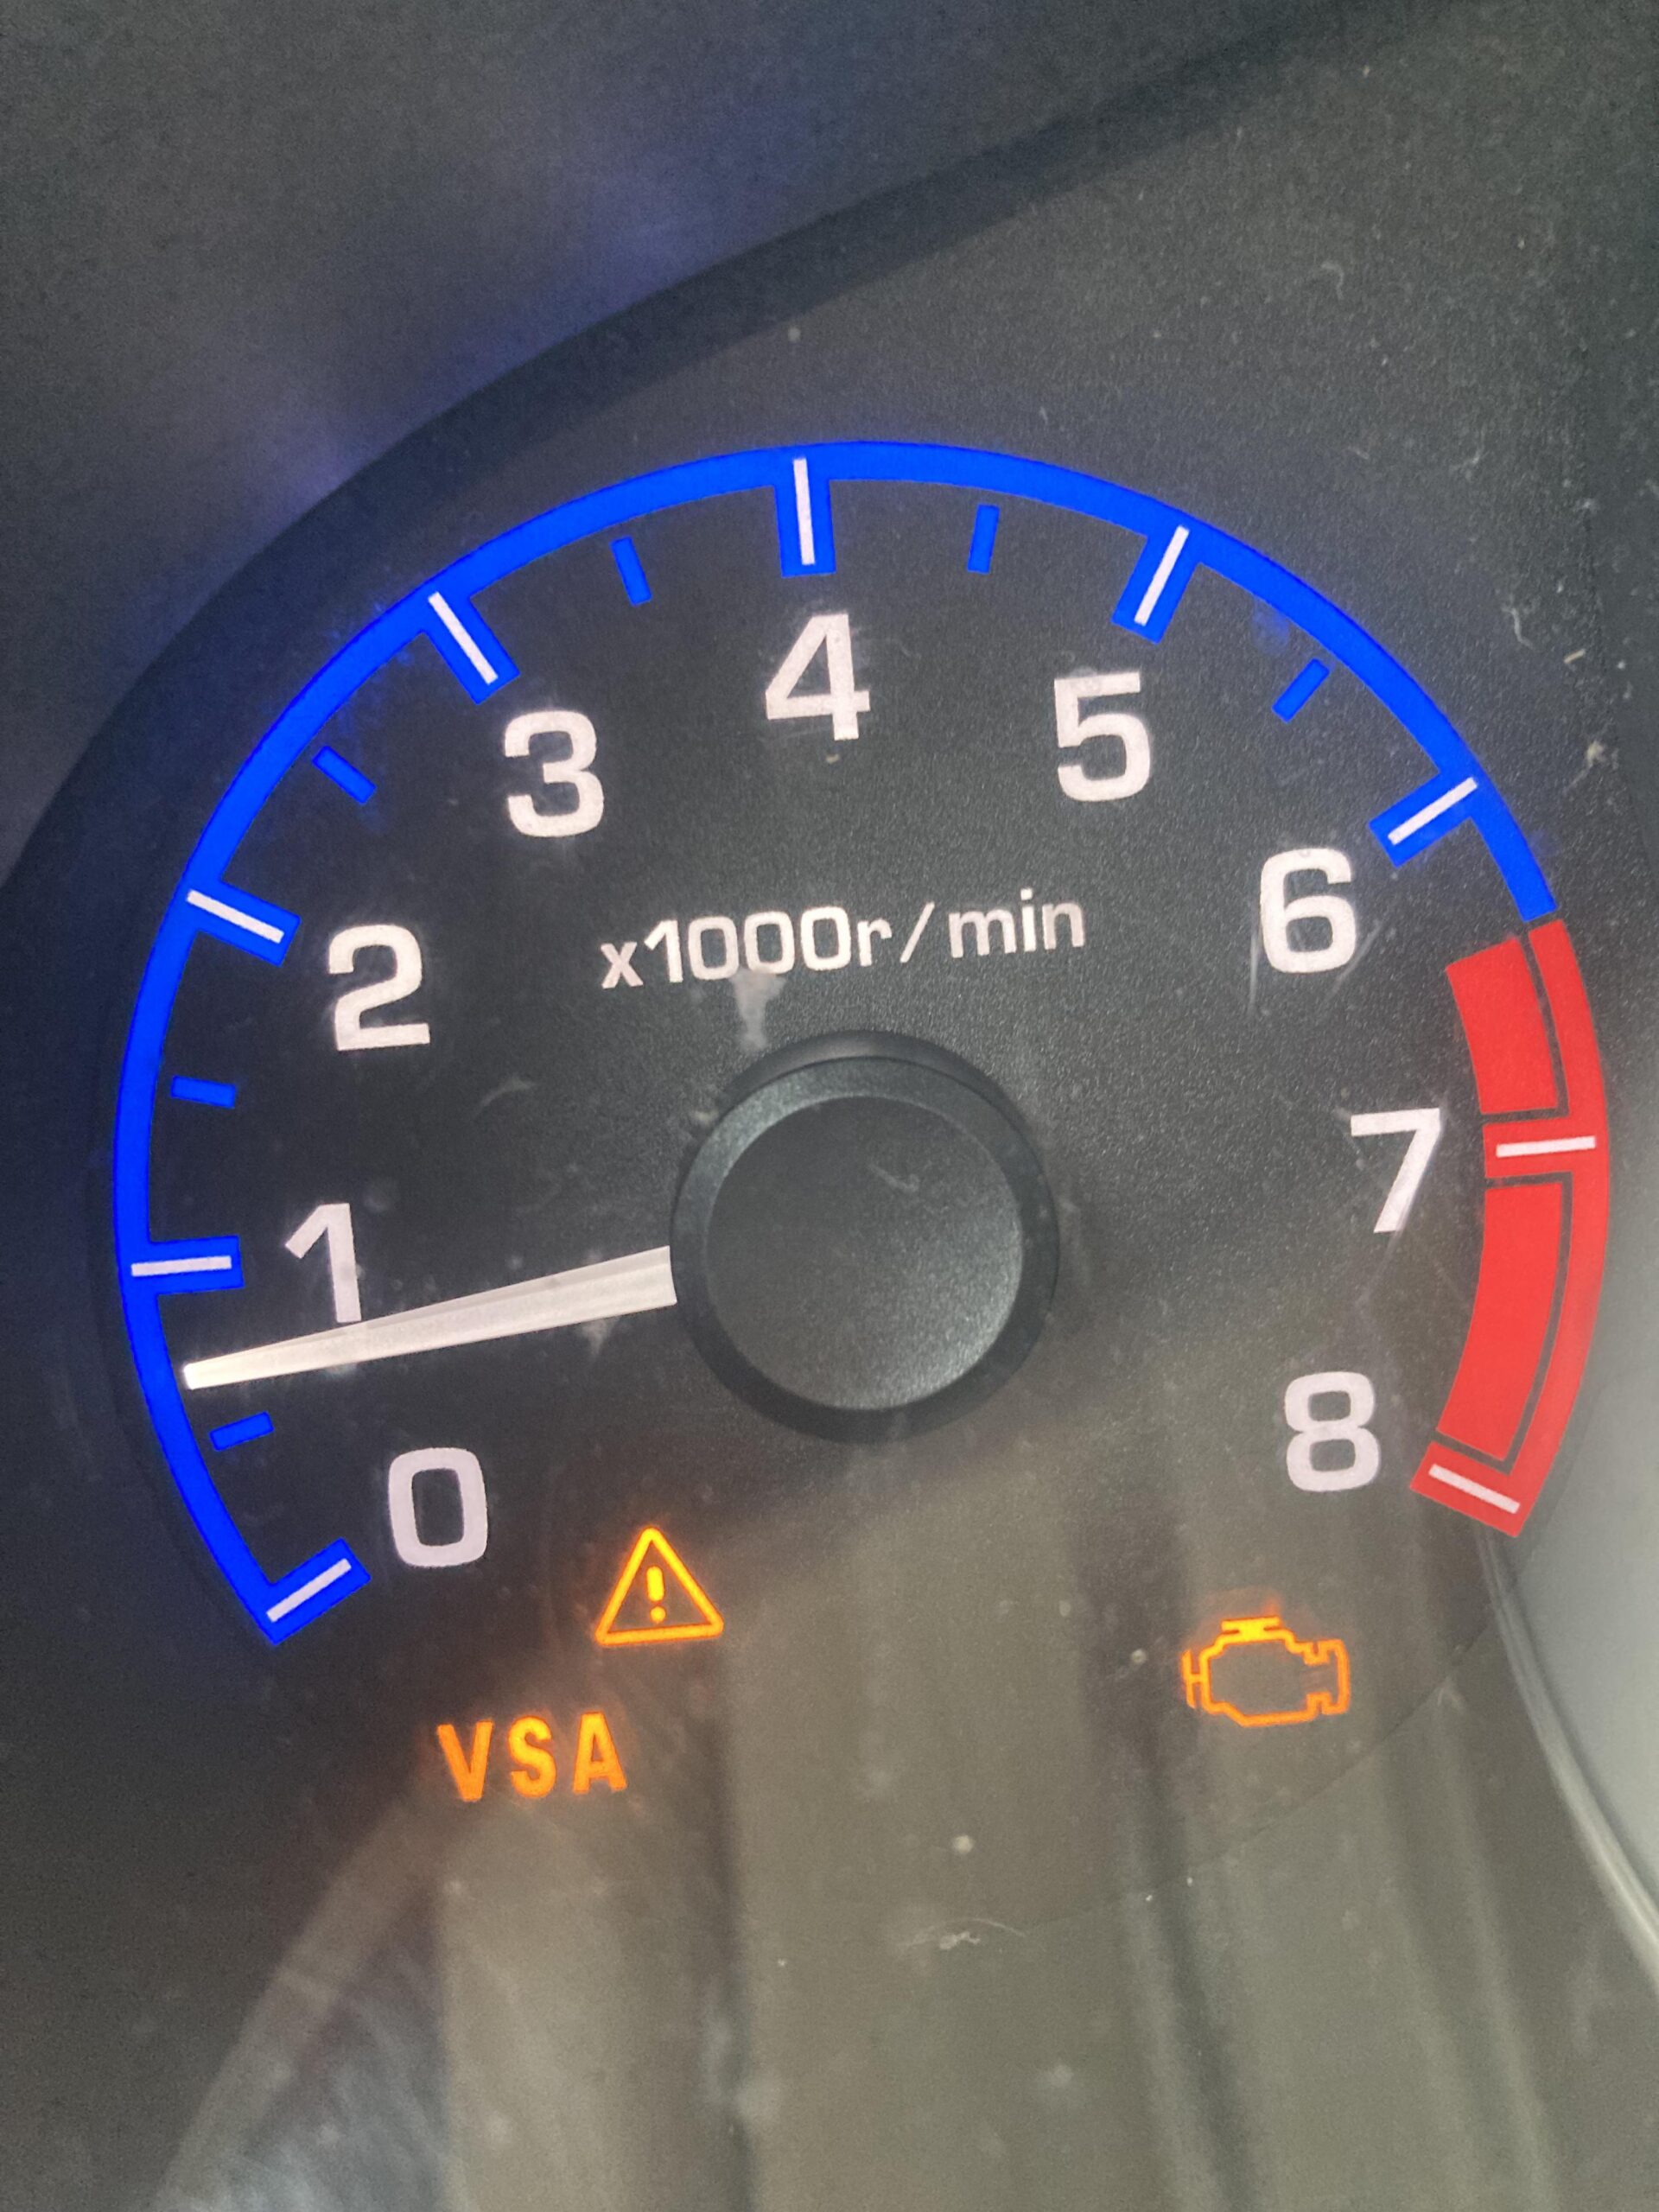 Accelerating But No Check Engine Light